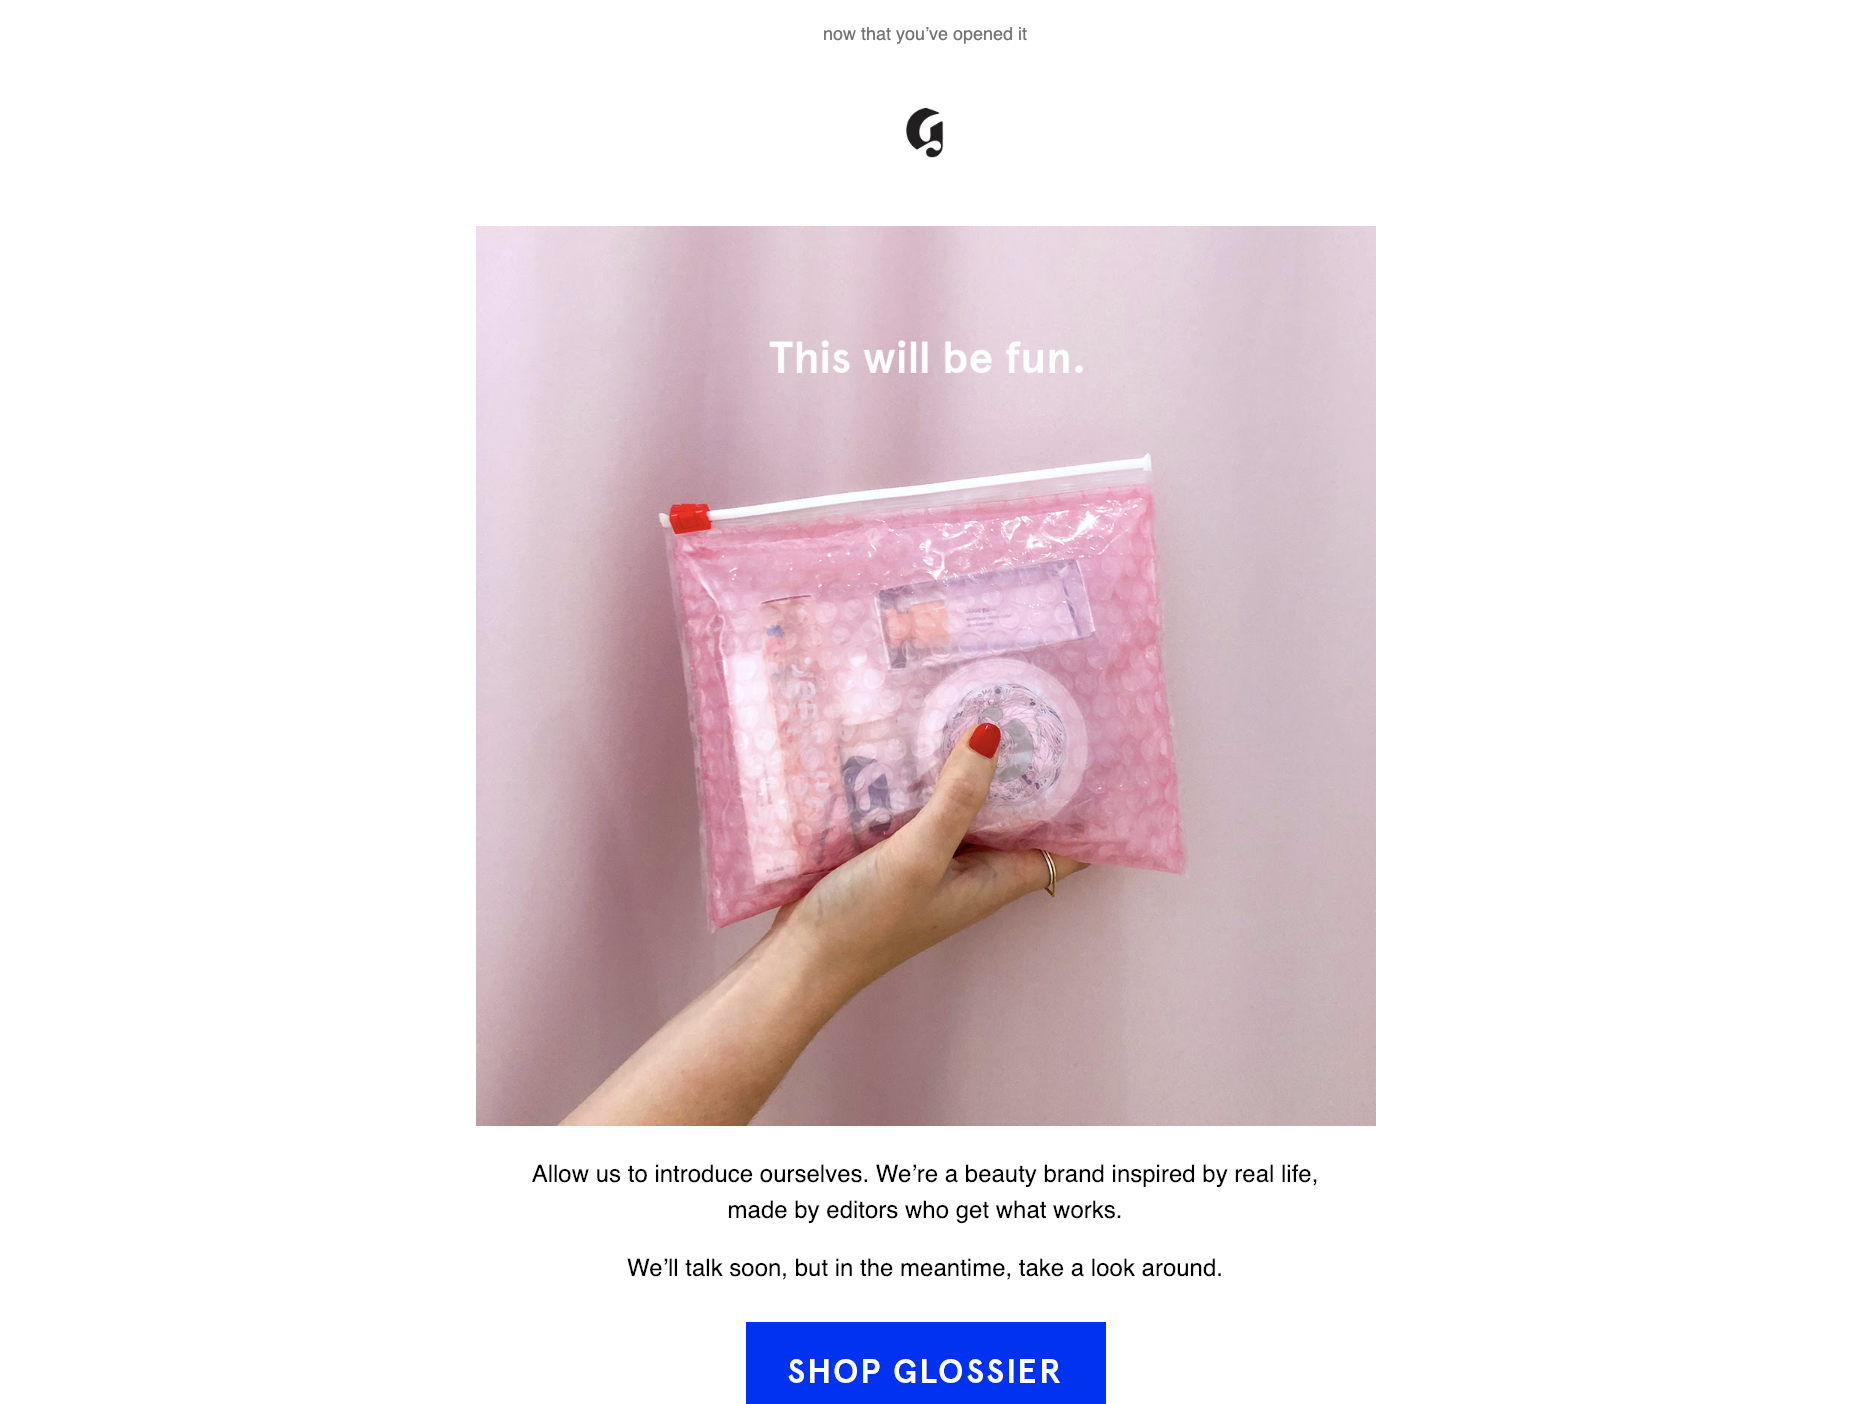 glossier-first-welcome-email-this-will-be-fun